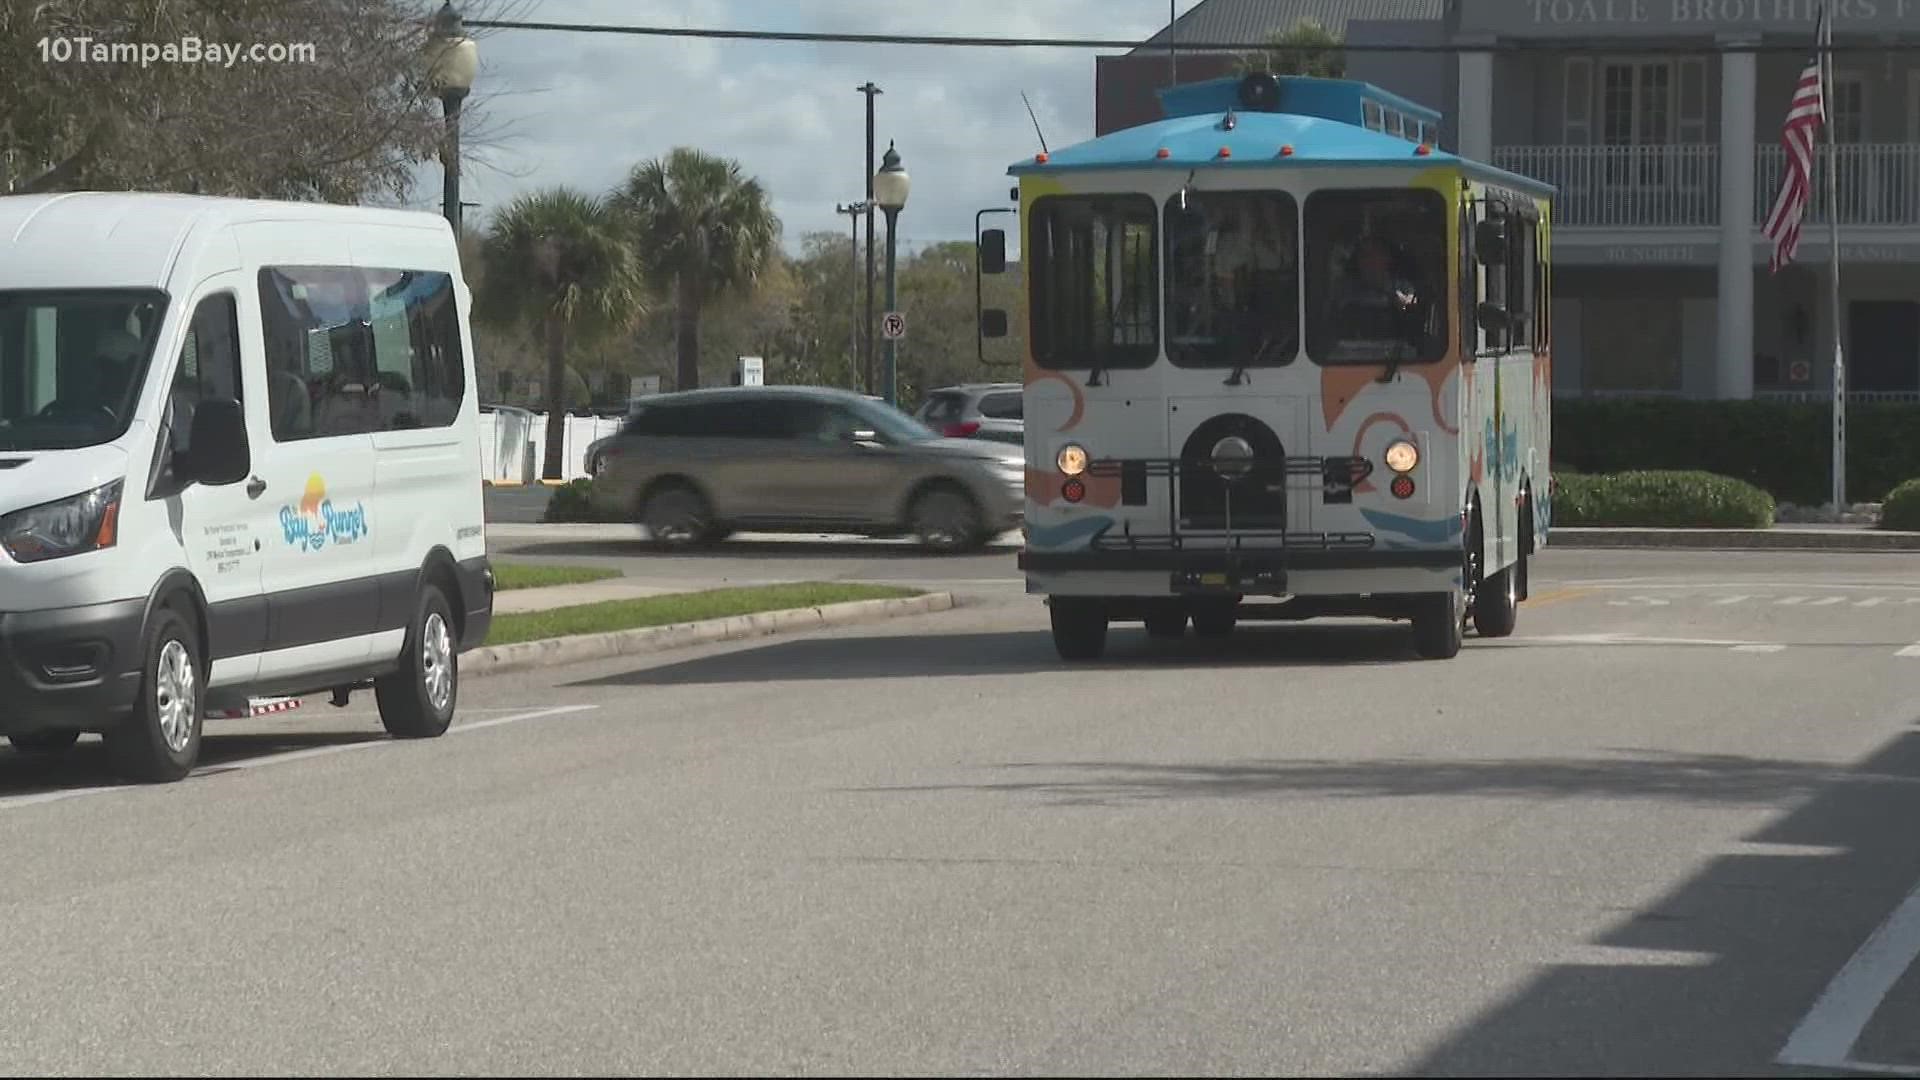 The trolley offers complimentary service between downtown Sarasota, St. Armands Circle and Lido Beach.